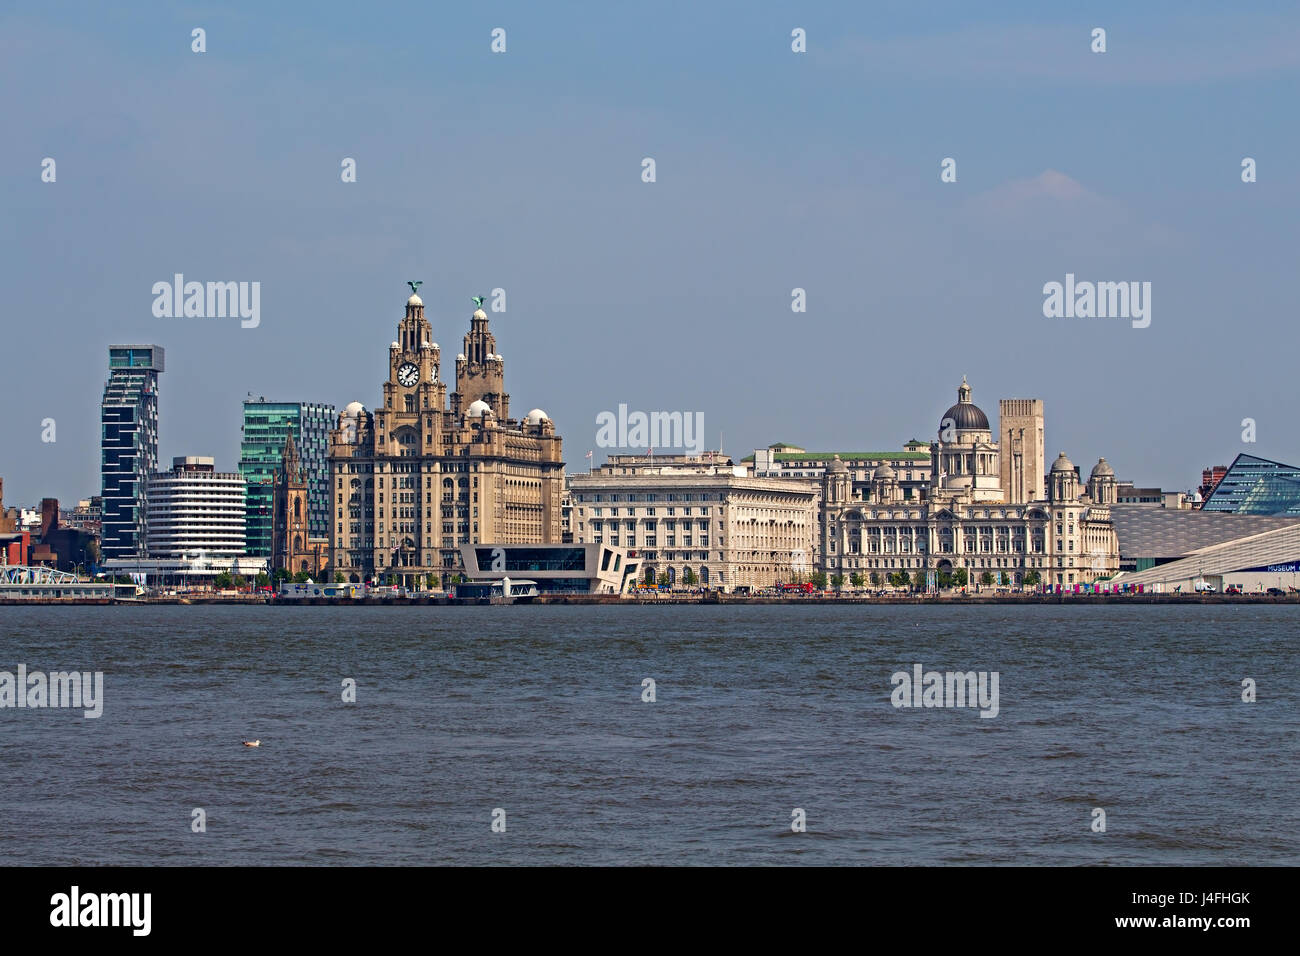 A view of Liverpool's historic waterfront buildings Stock Photo